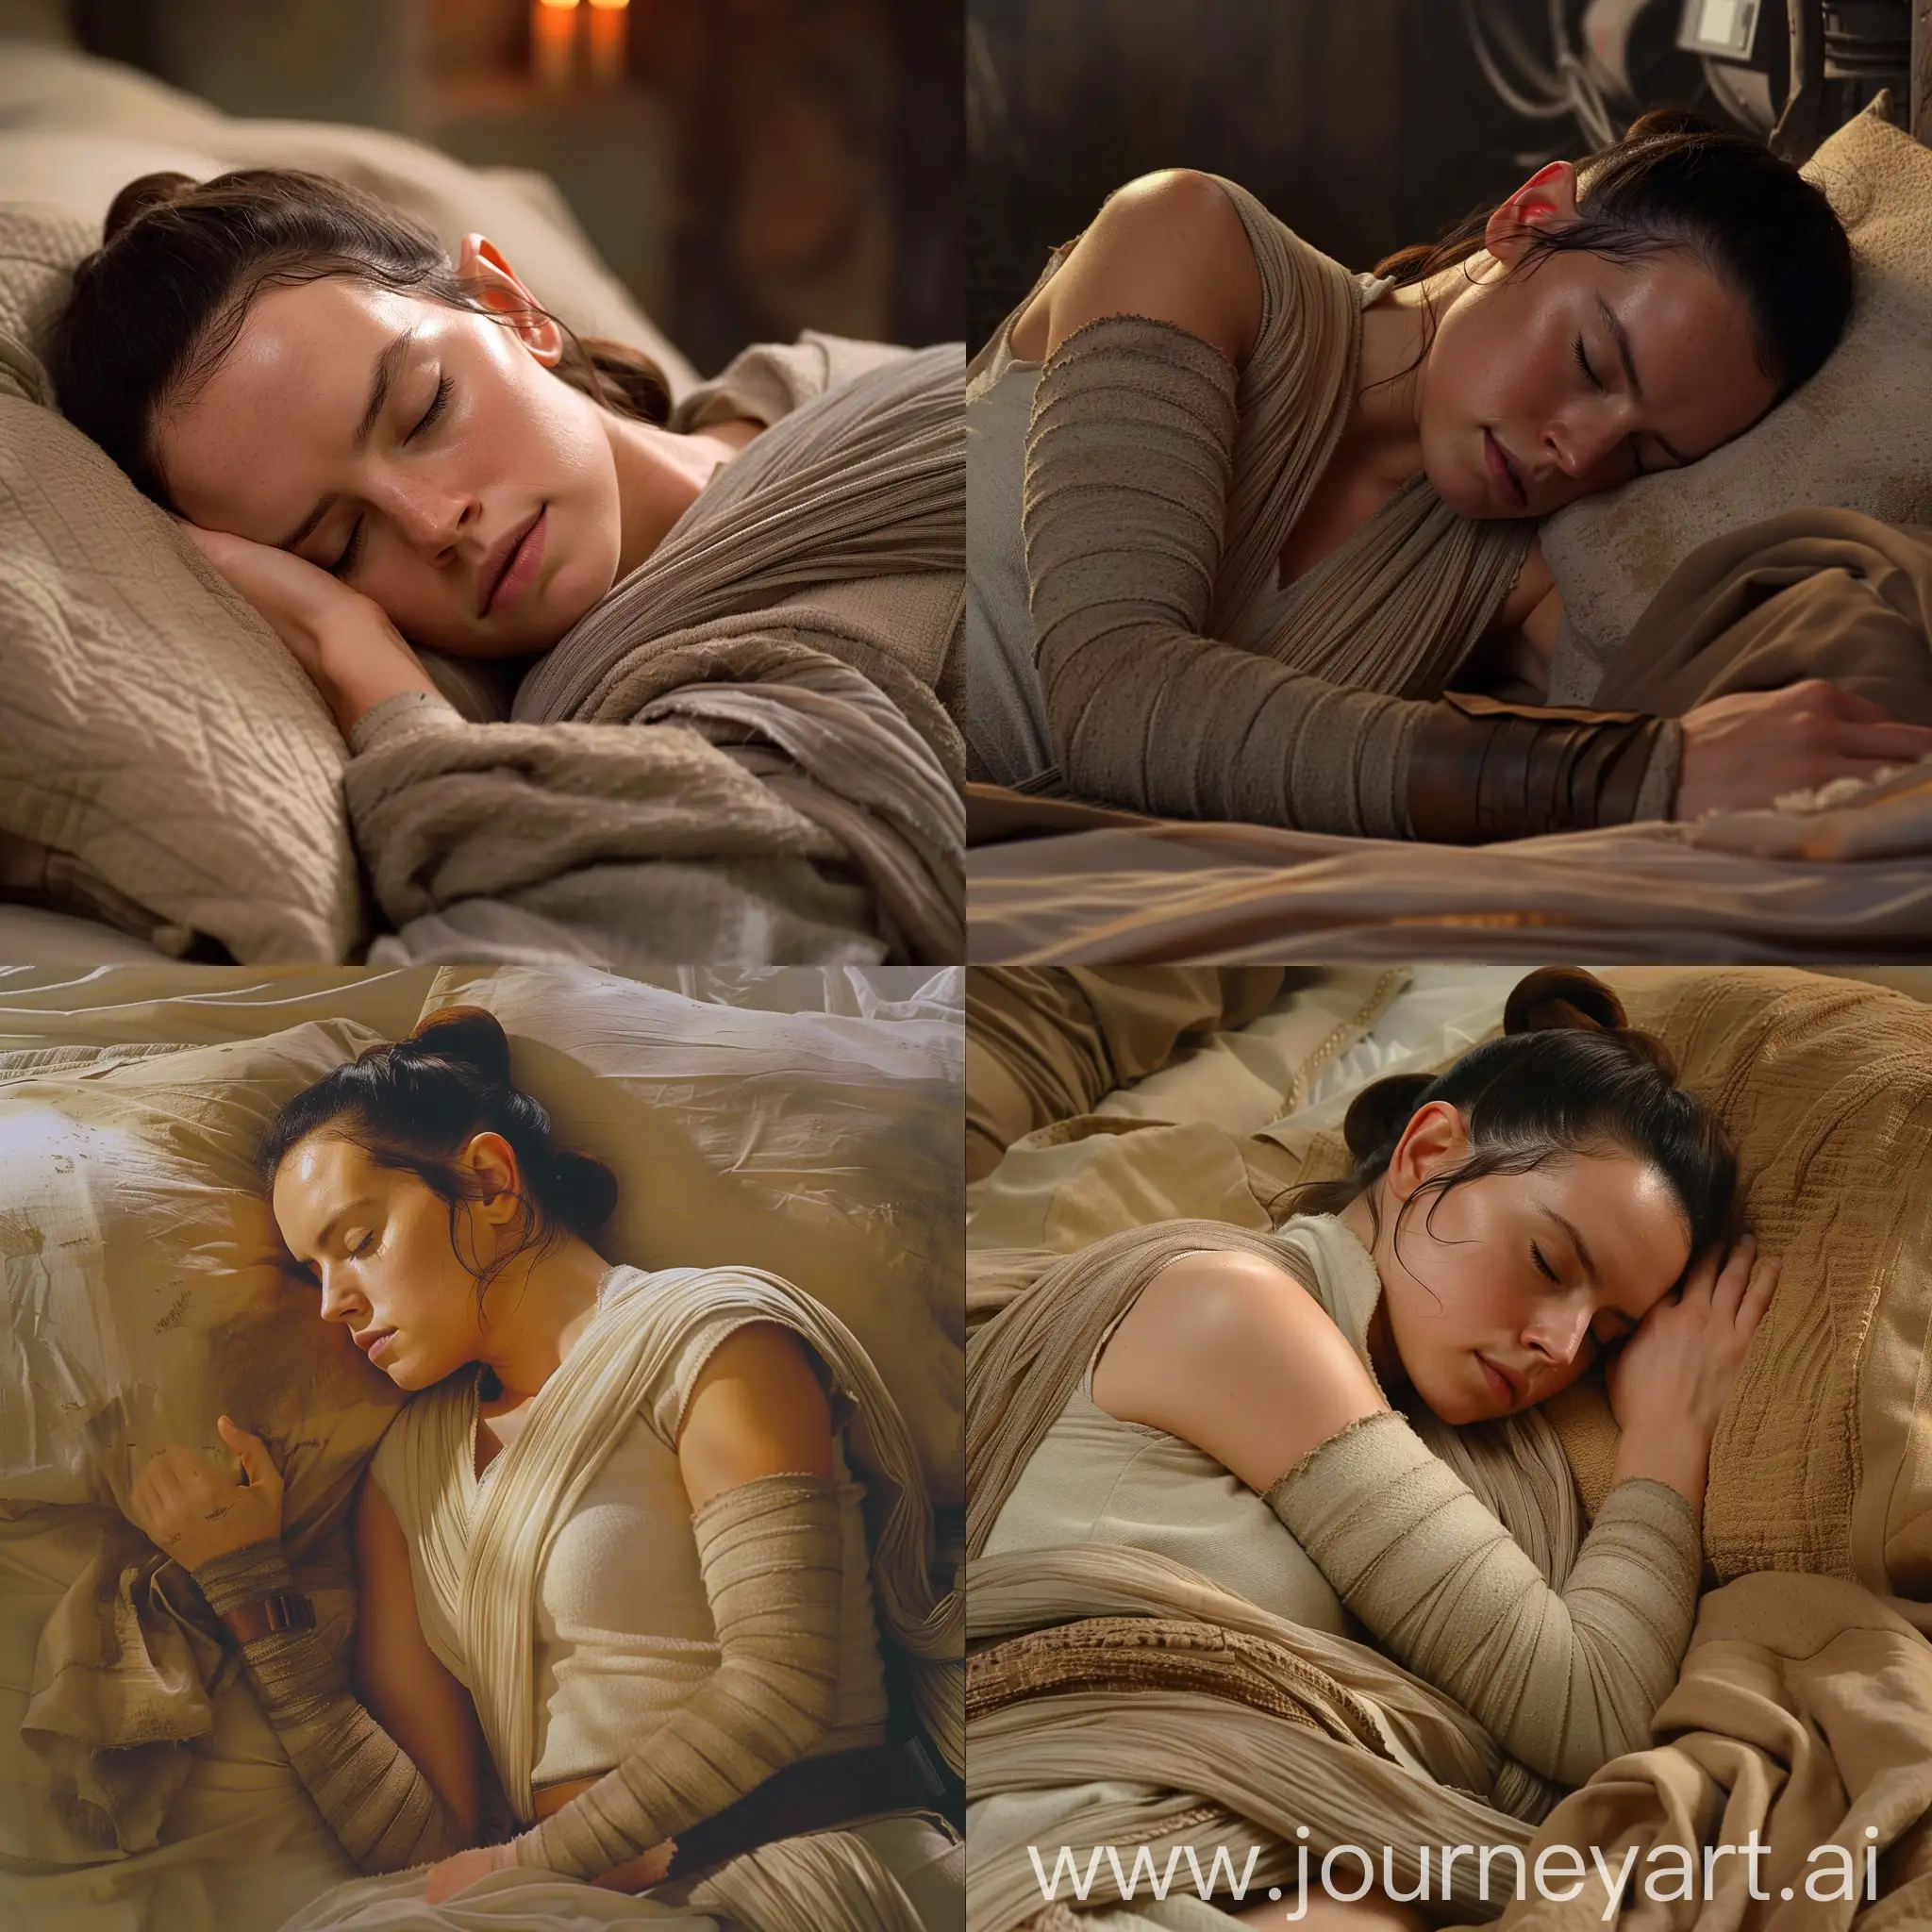 Rey-from-Star-Wars-Sleeping-in-Bed